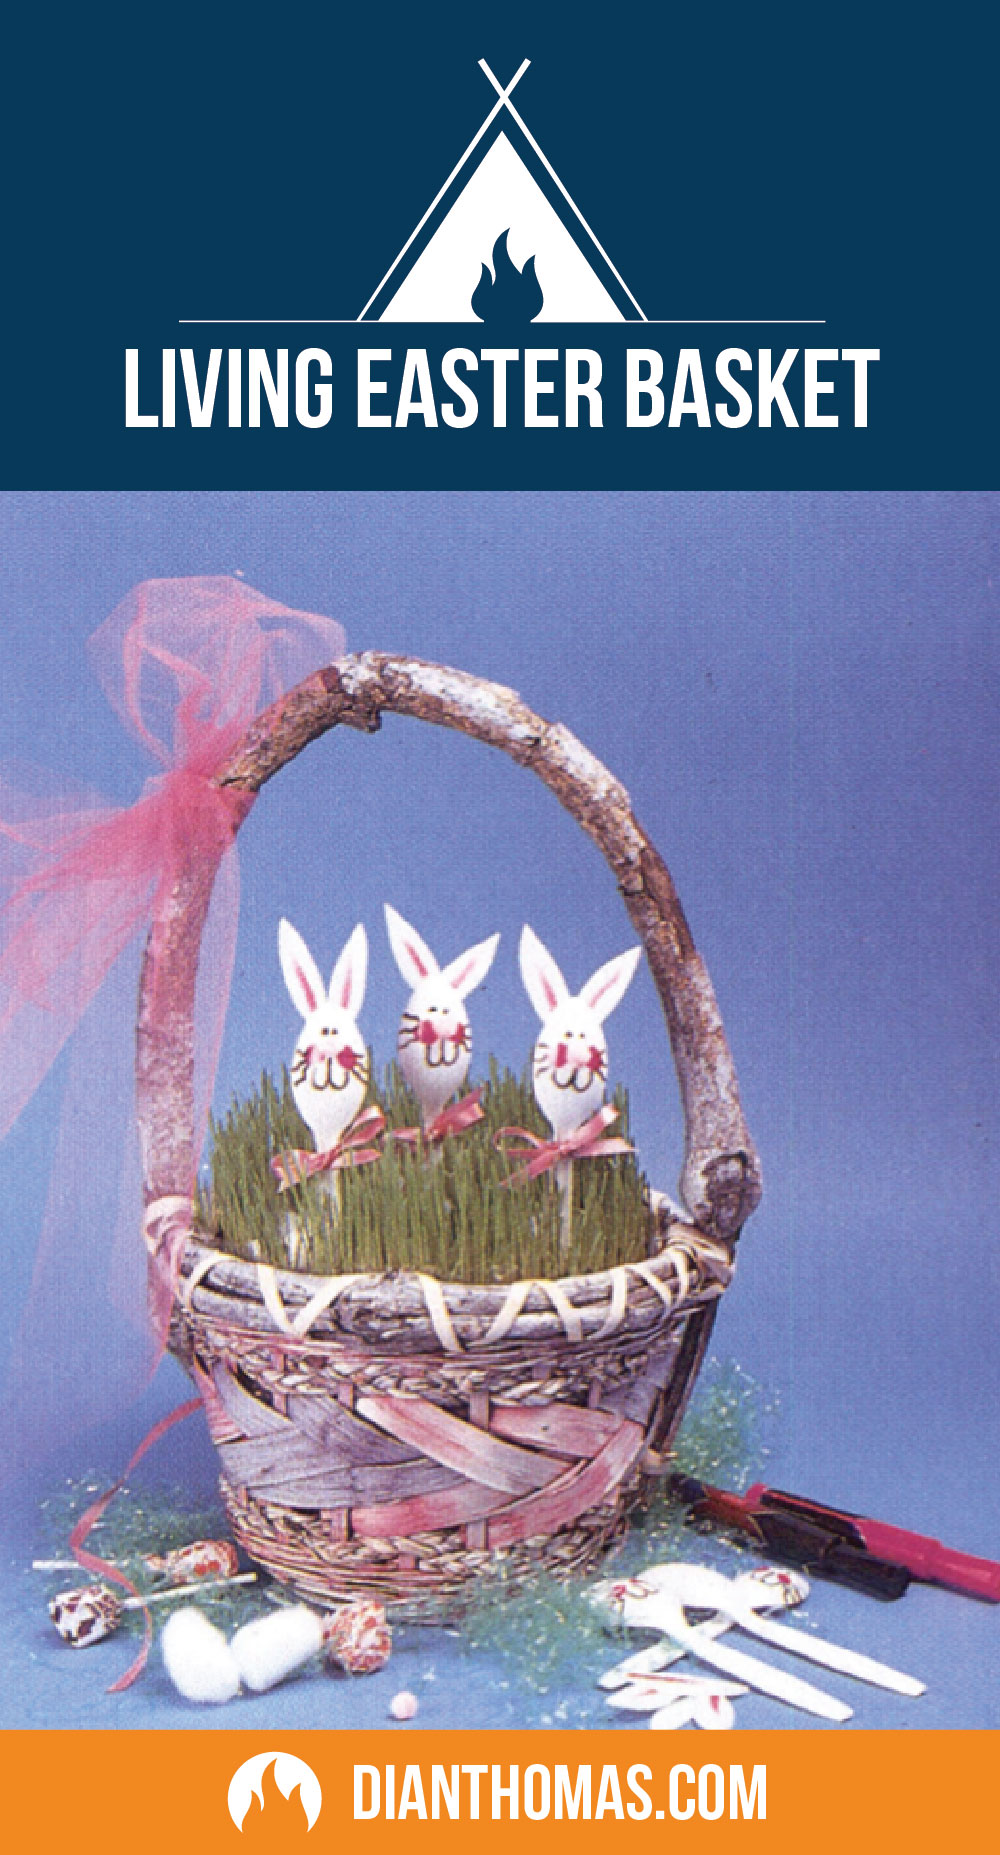 Dian Thomas will tech you the all the tips and tricks to create an Easter Egg Basket with live green grass growing out of it! It is sure to be a highlight of your Easter décor!